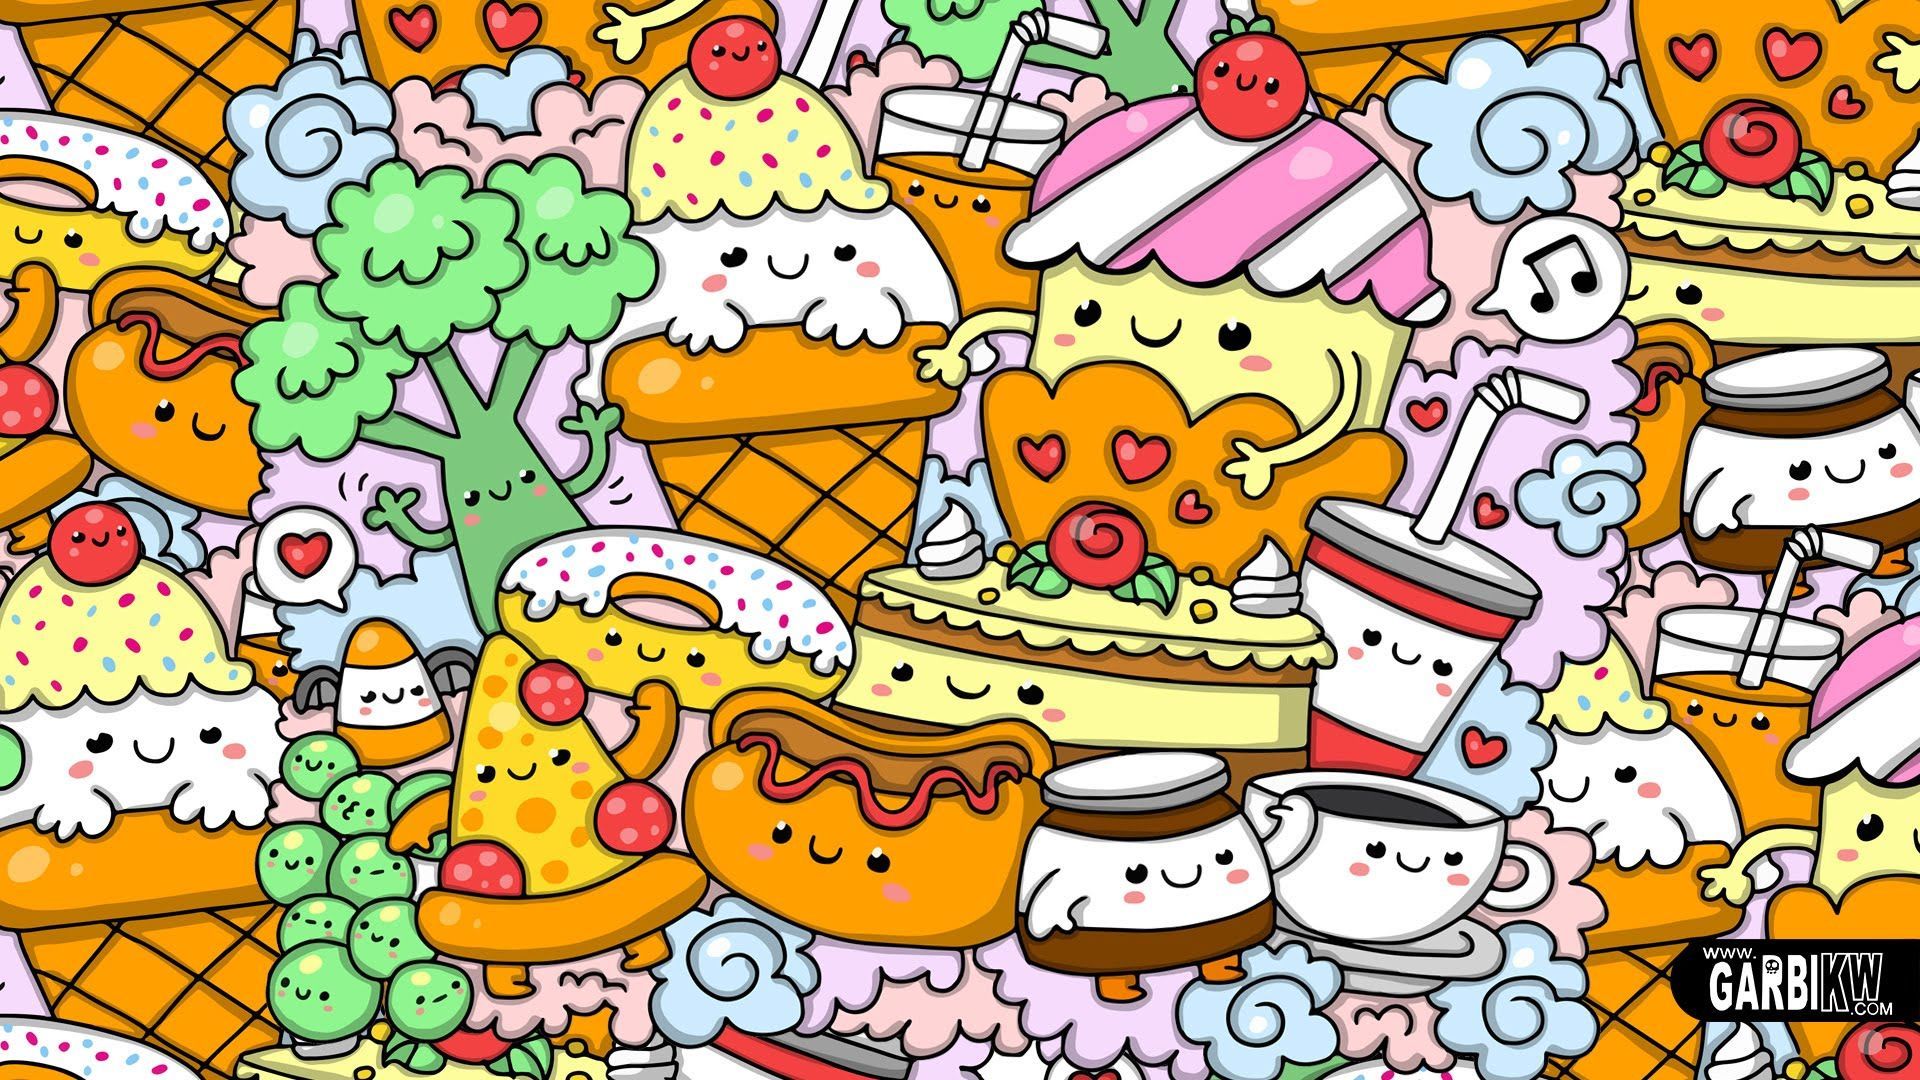 Wallpaper Cute Drawings Of Food With Faces